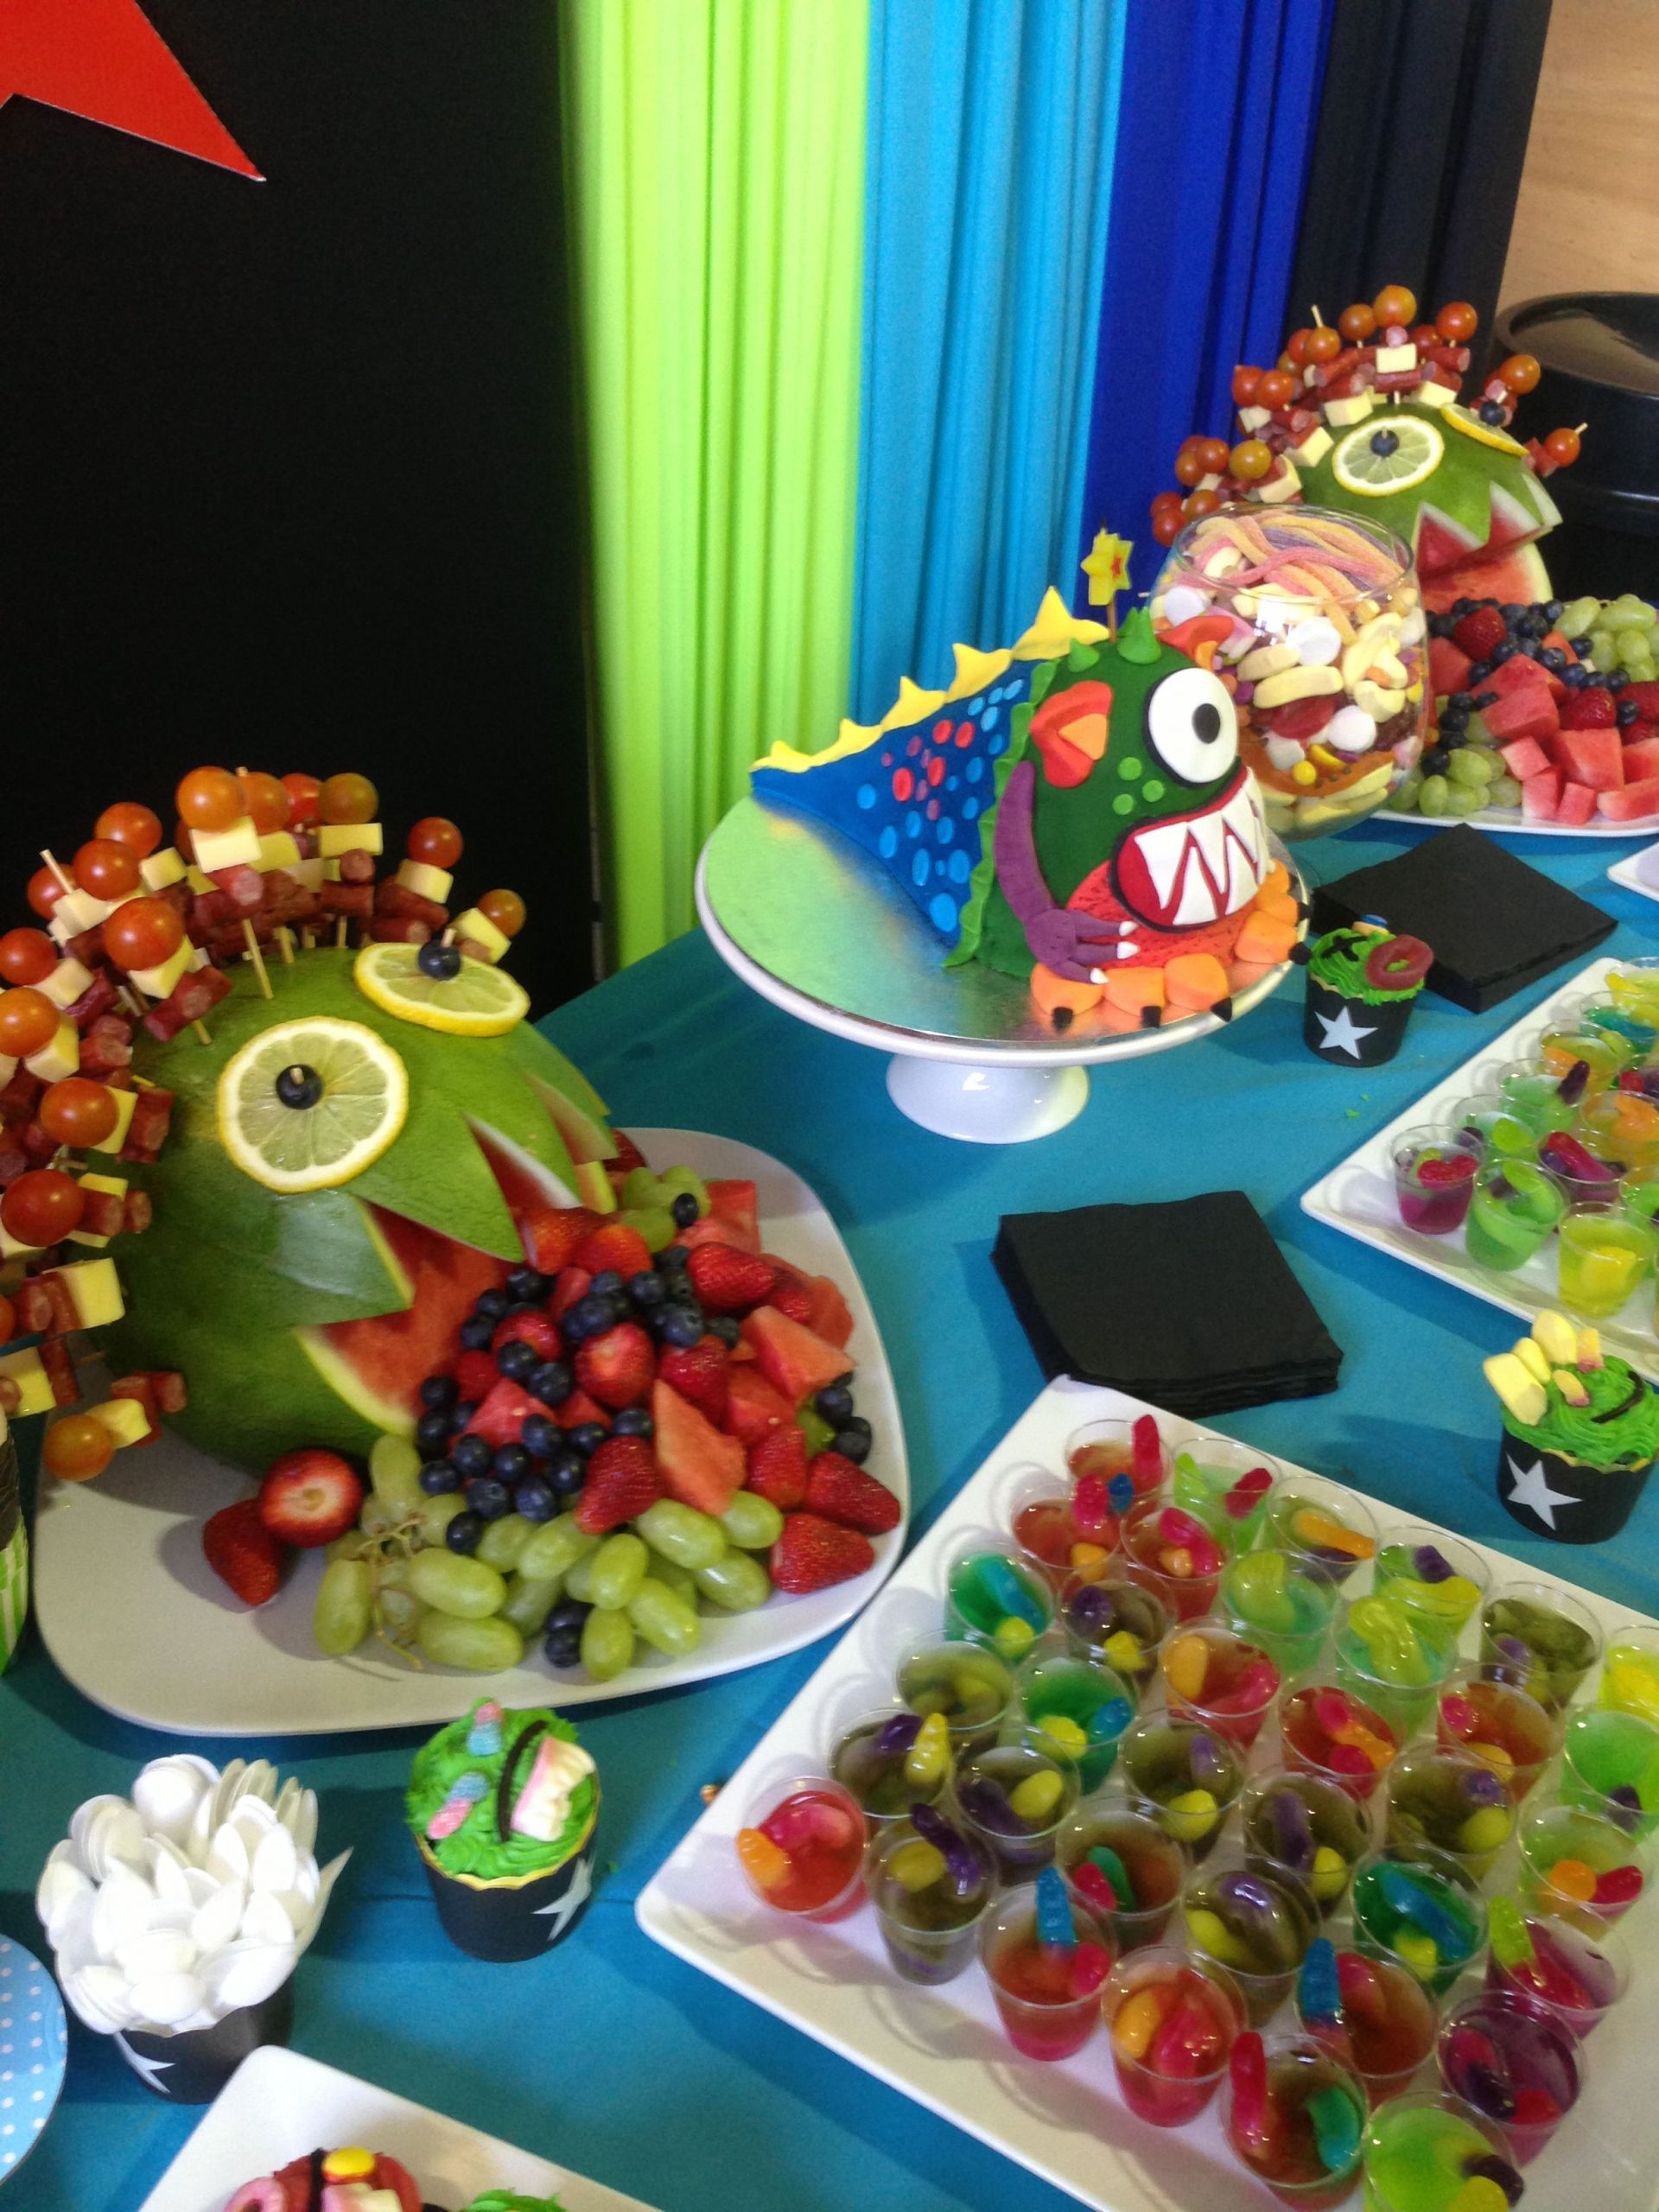 Monsters Inc Birthday Party Food Ideas
 Monster party food Also check out my site